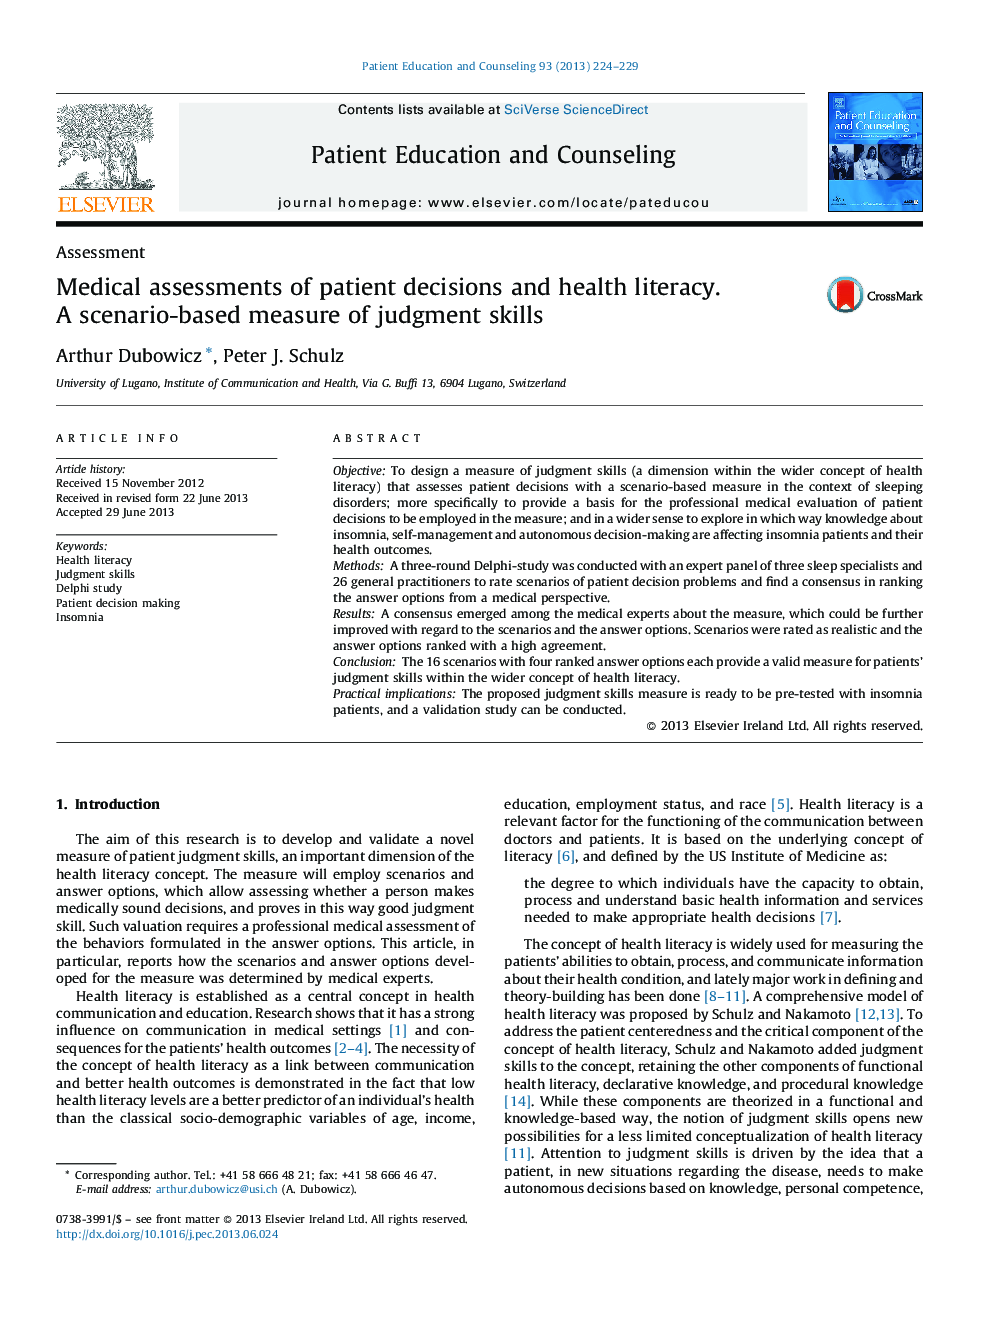 Medical assessments of patient decisions and health literacy. A scenario-based measure of judgment skills